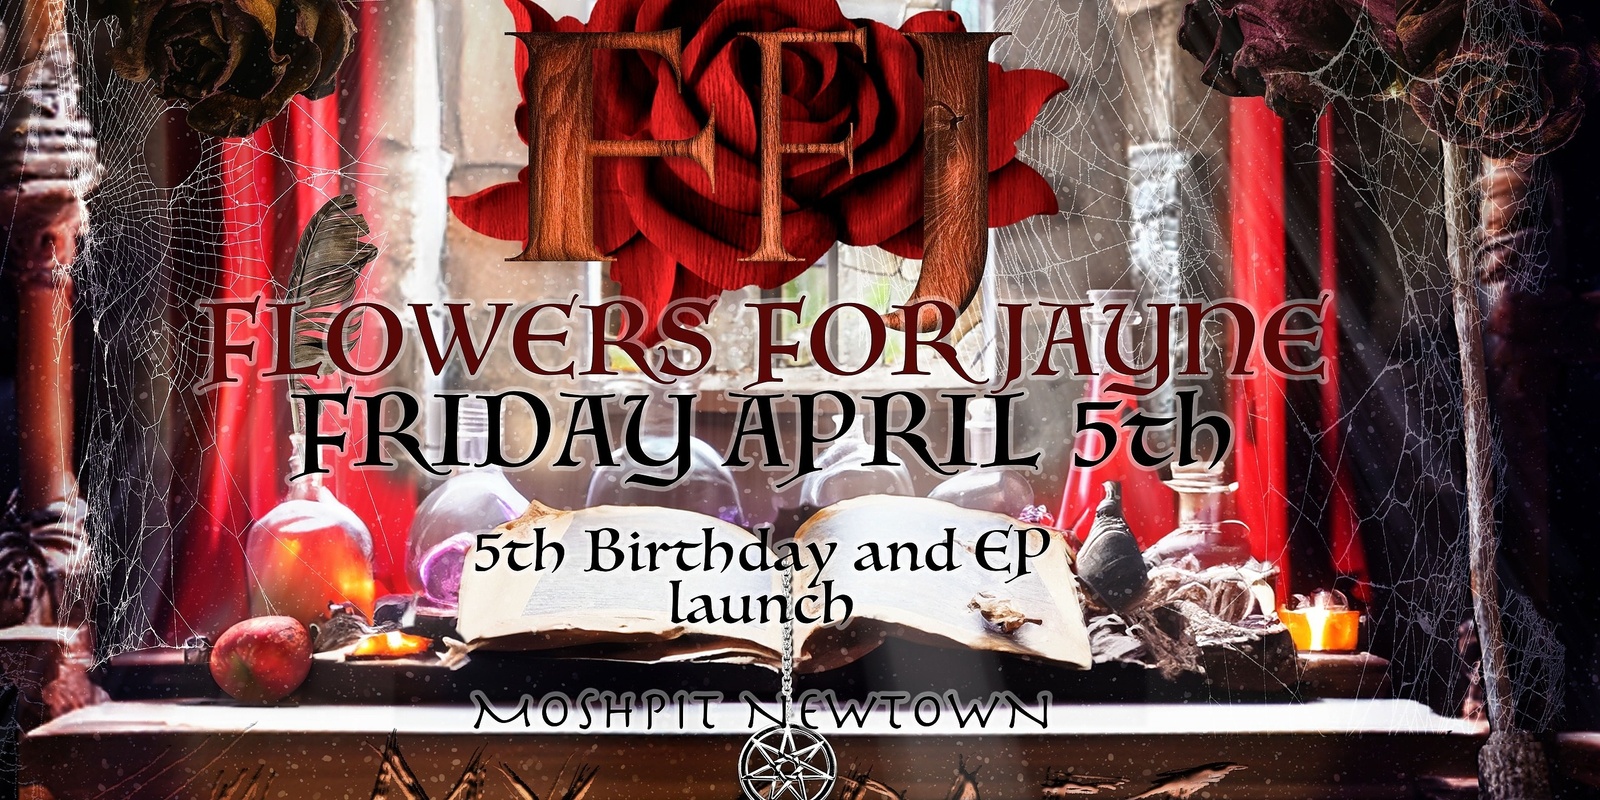 Banner image for FFJ's 5th Birthday and EP Launch 